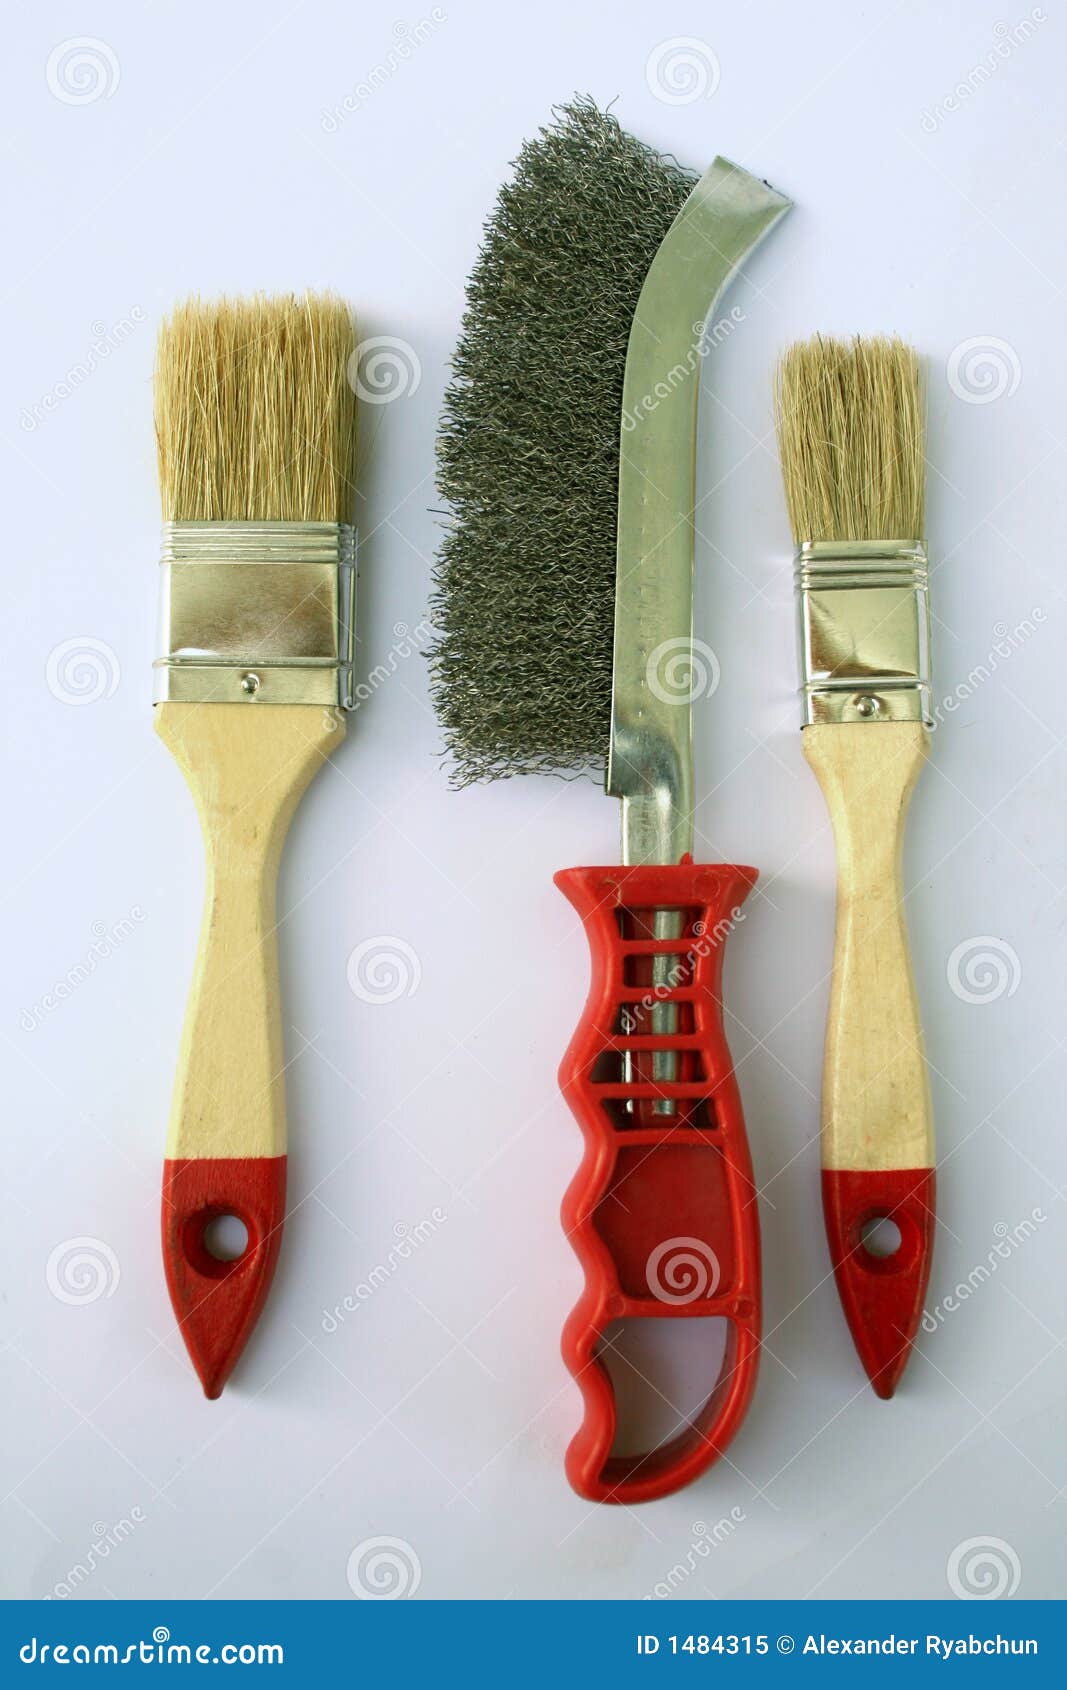 two painting brushes and abrasive brush in the middle